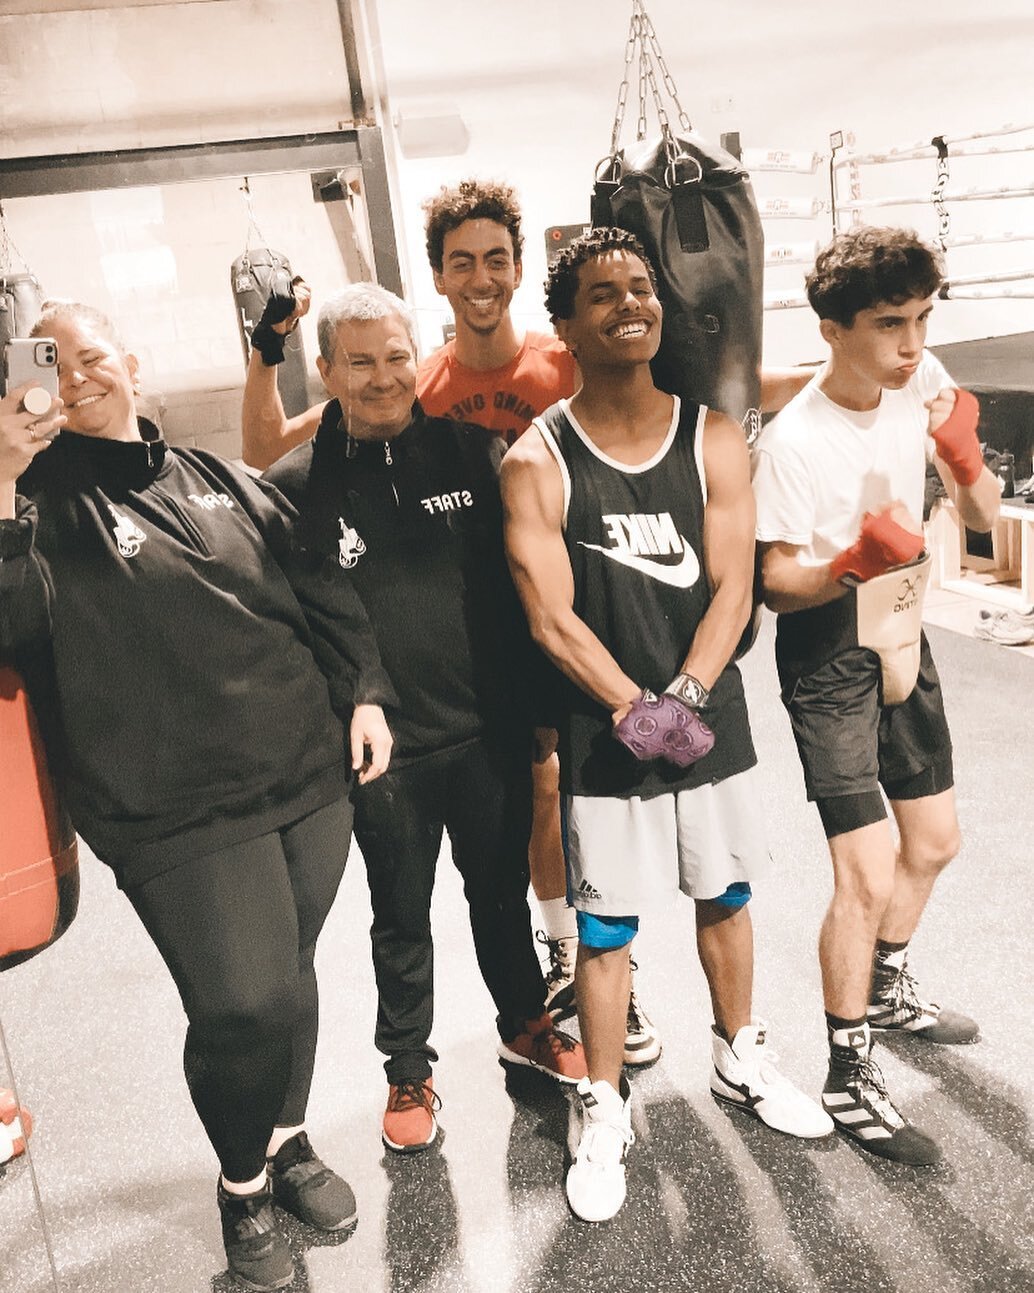 They say it&rsquo;s the loneliest sport in the world&hellip;but it doesn&rsquo;t have to be 😀🥊

13th Round Fight for Life is a charitable program serving at-risk youth. We combine boxing instruction with life skills workshops and academic and socia